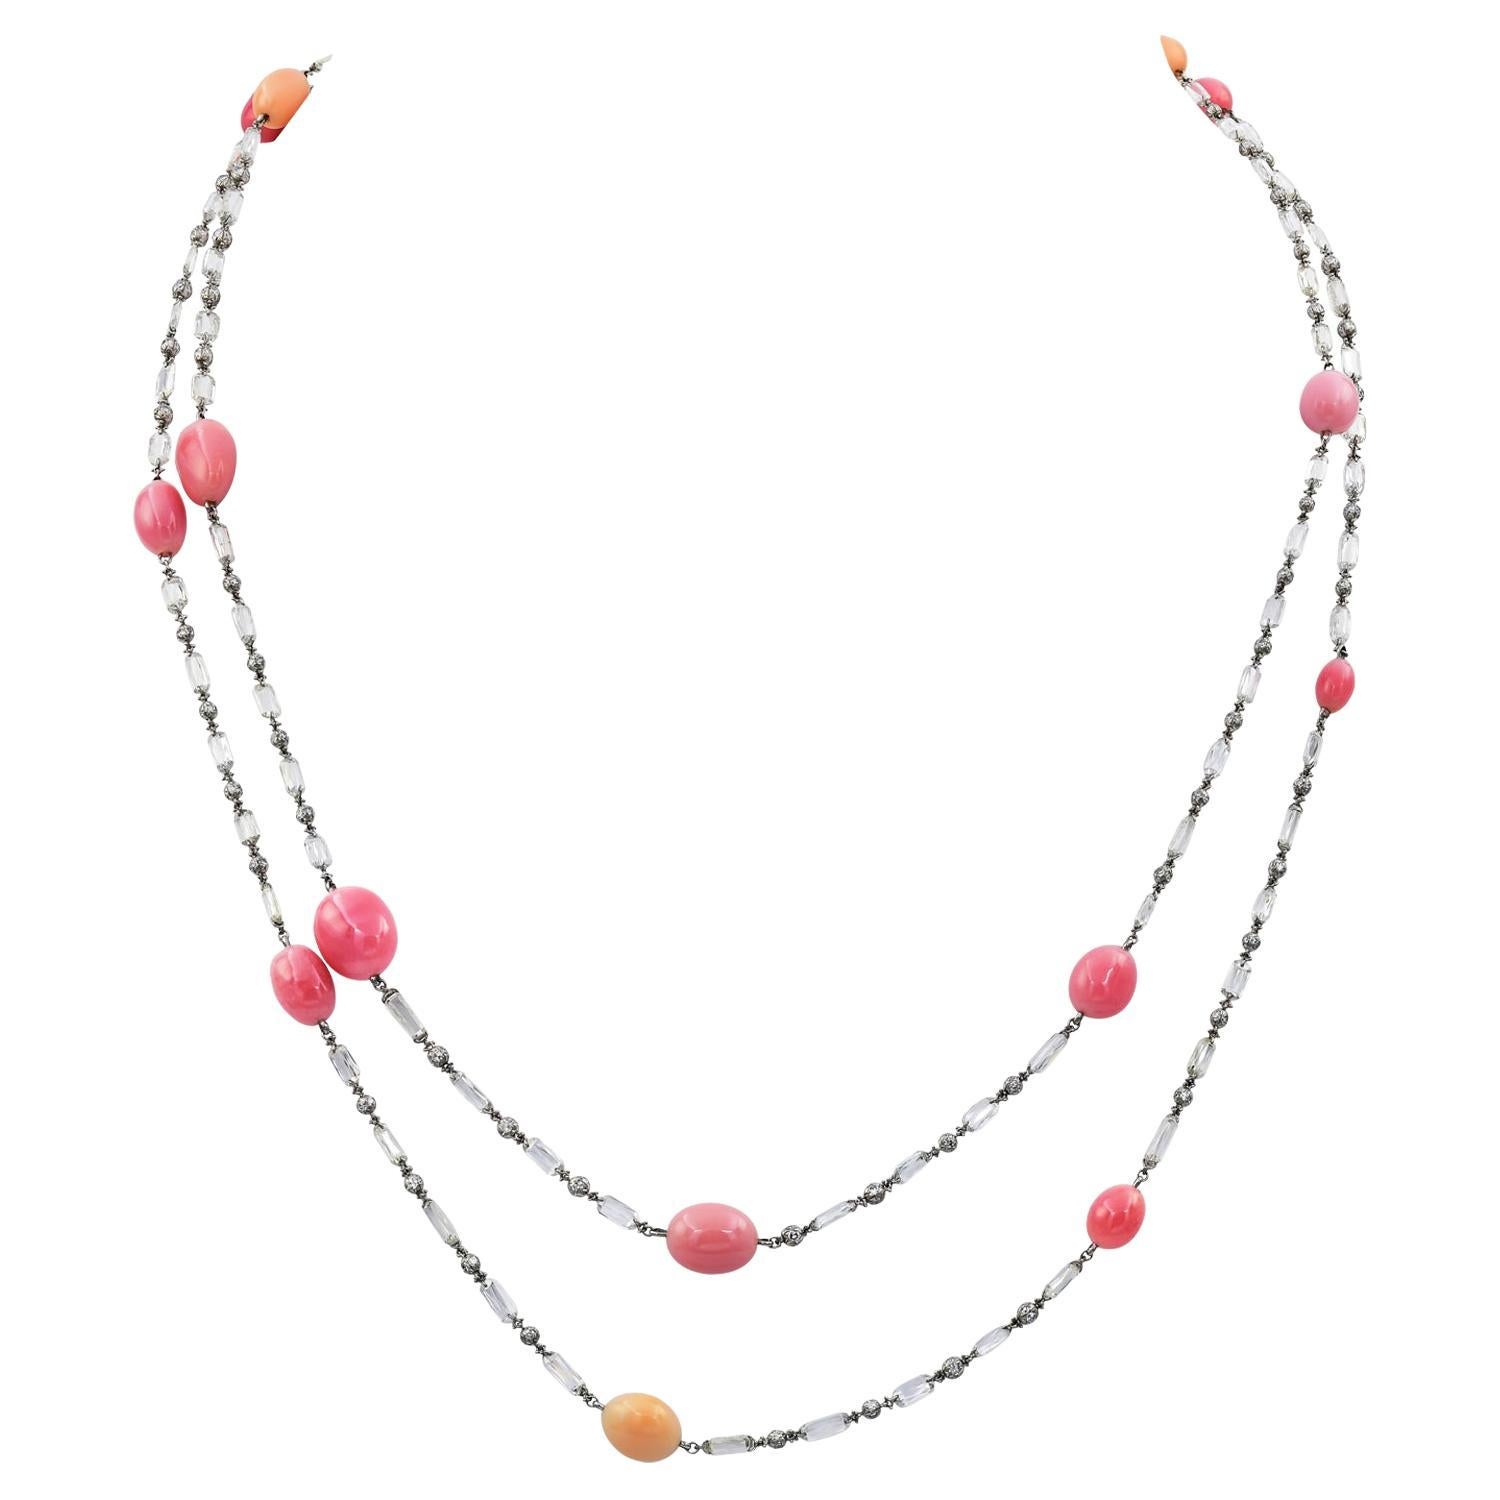 Spectra Fine Jewelry Chain Necklaces